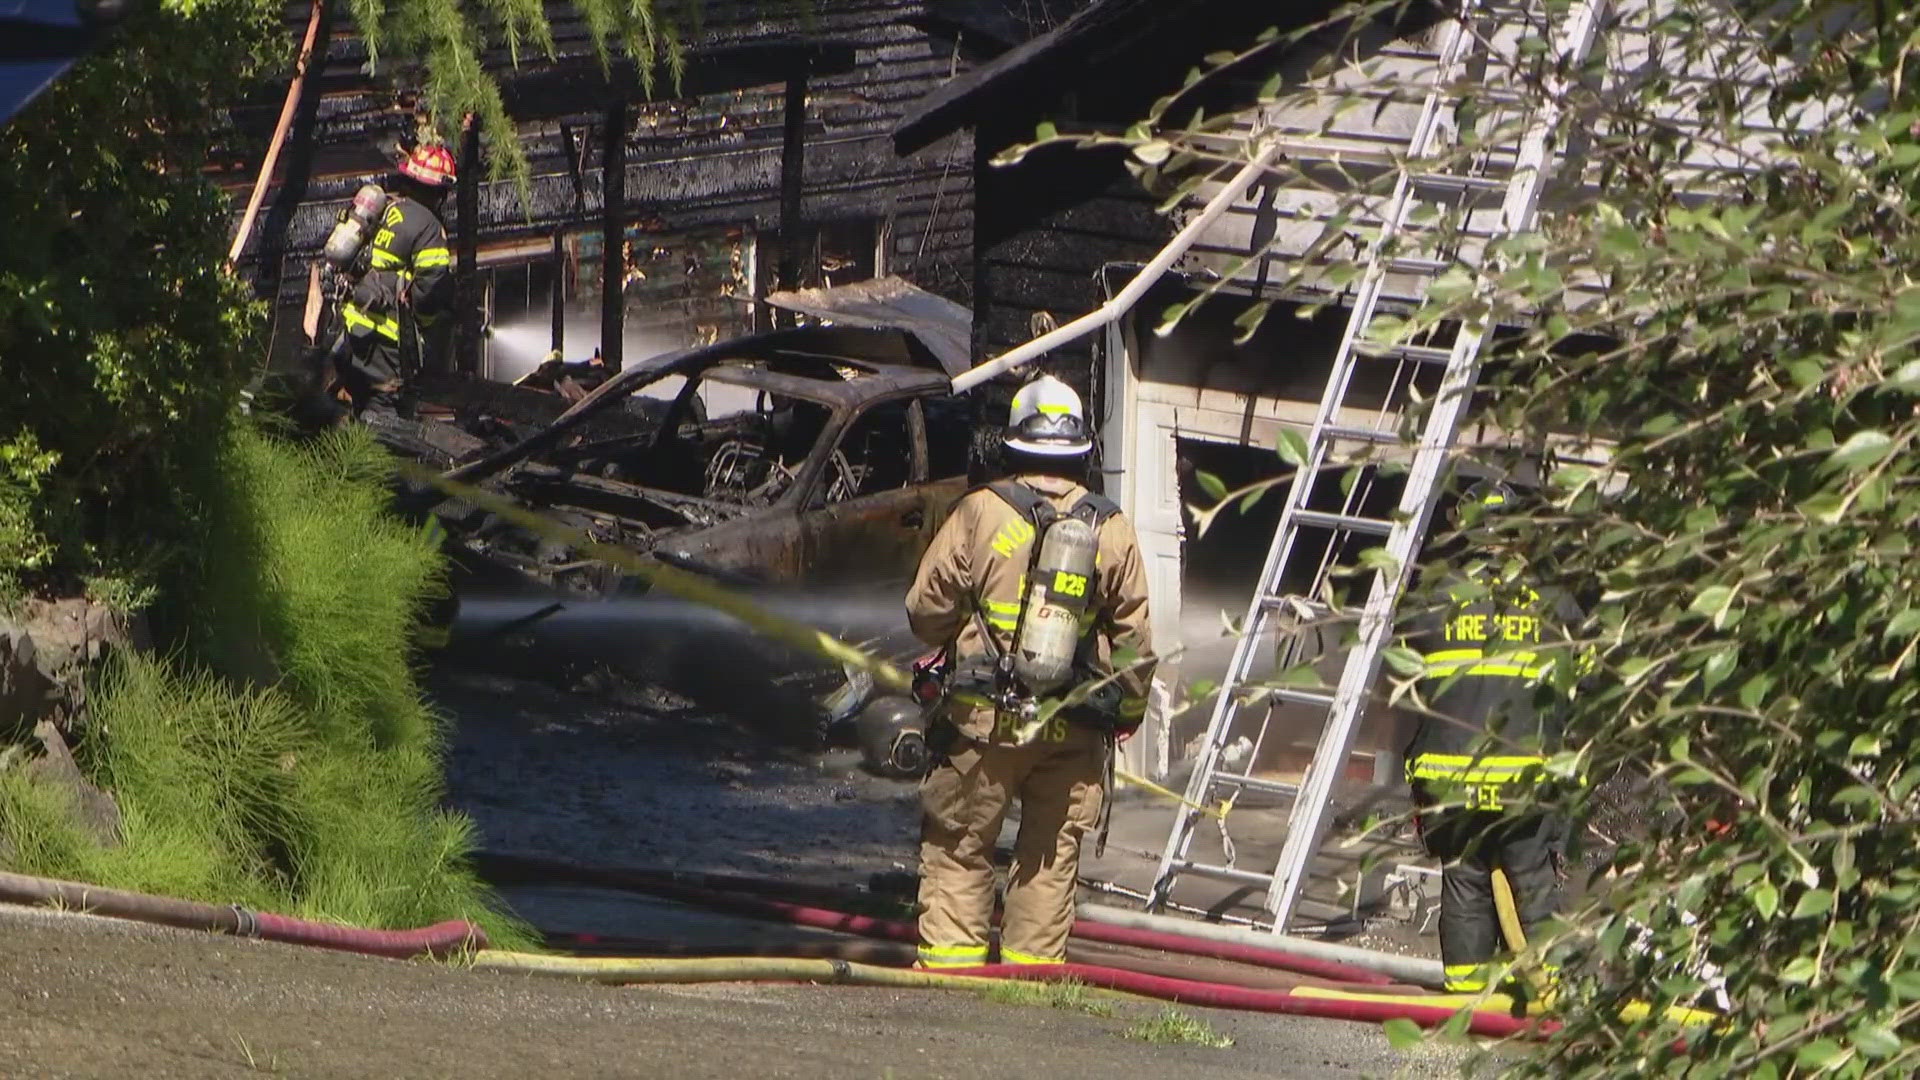 Two firefighters were injured Thursday afternoon while crews worked to extinguish two house fires in Everett's Valley View neighborhood.